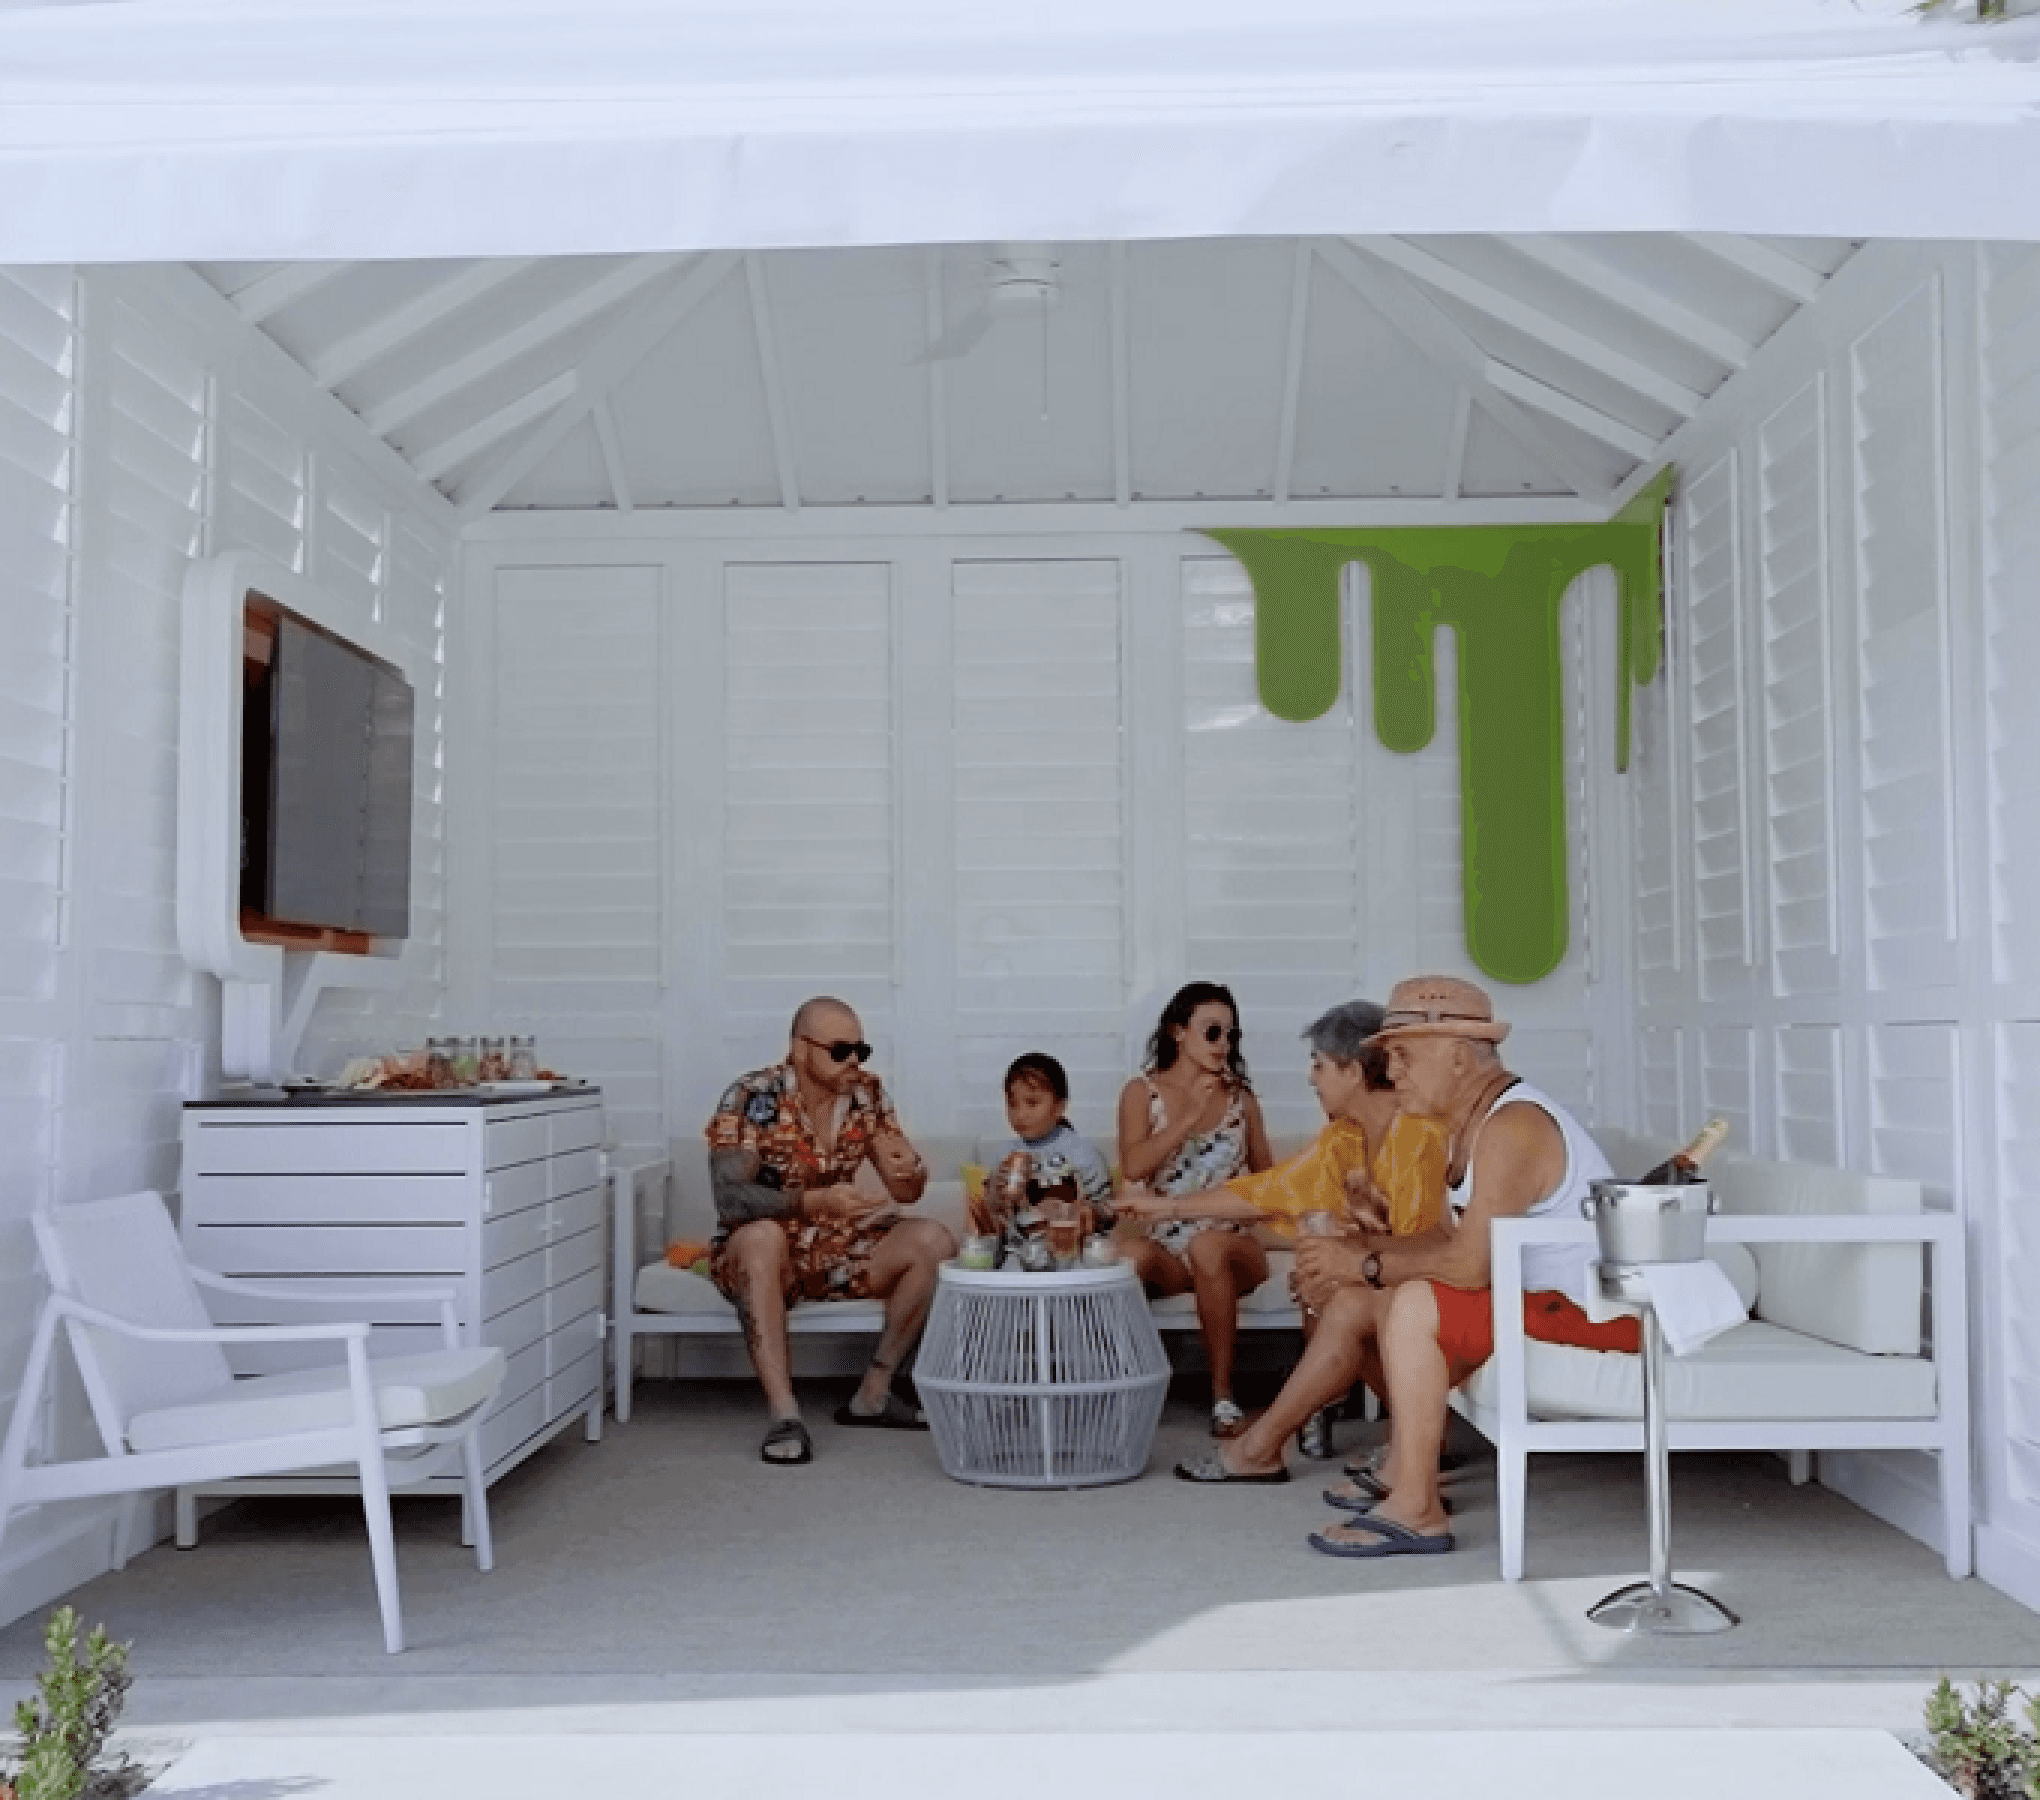 A family dines in a cabana